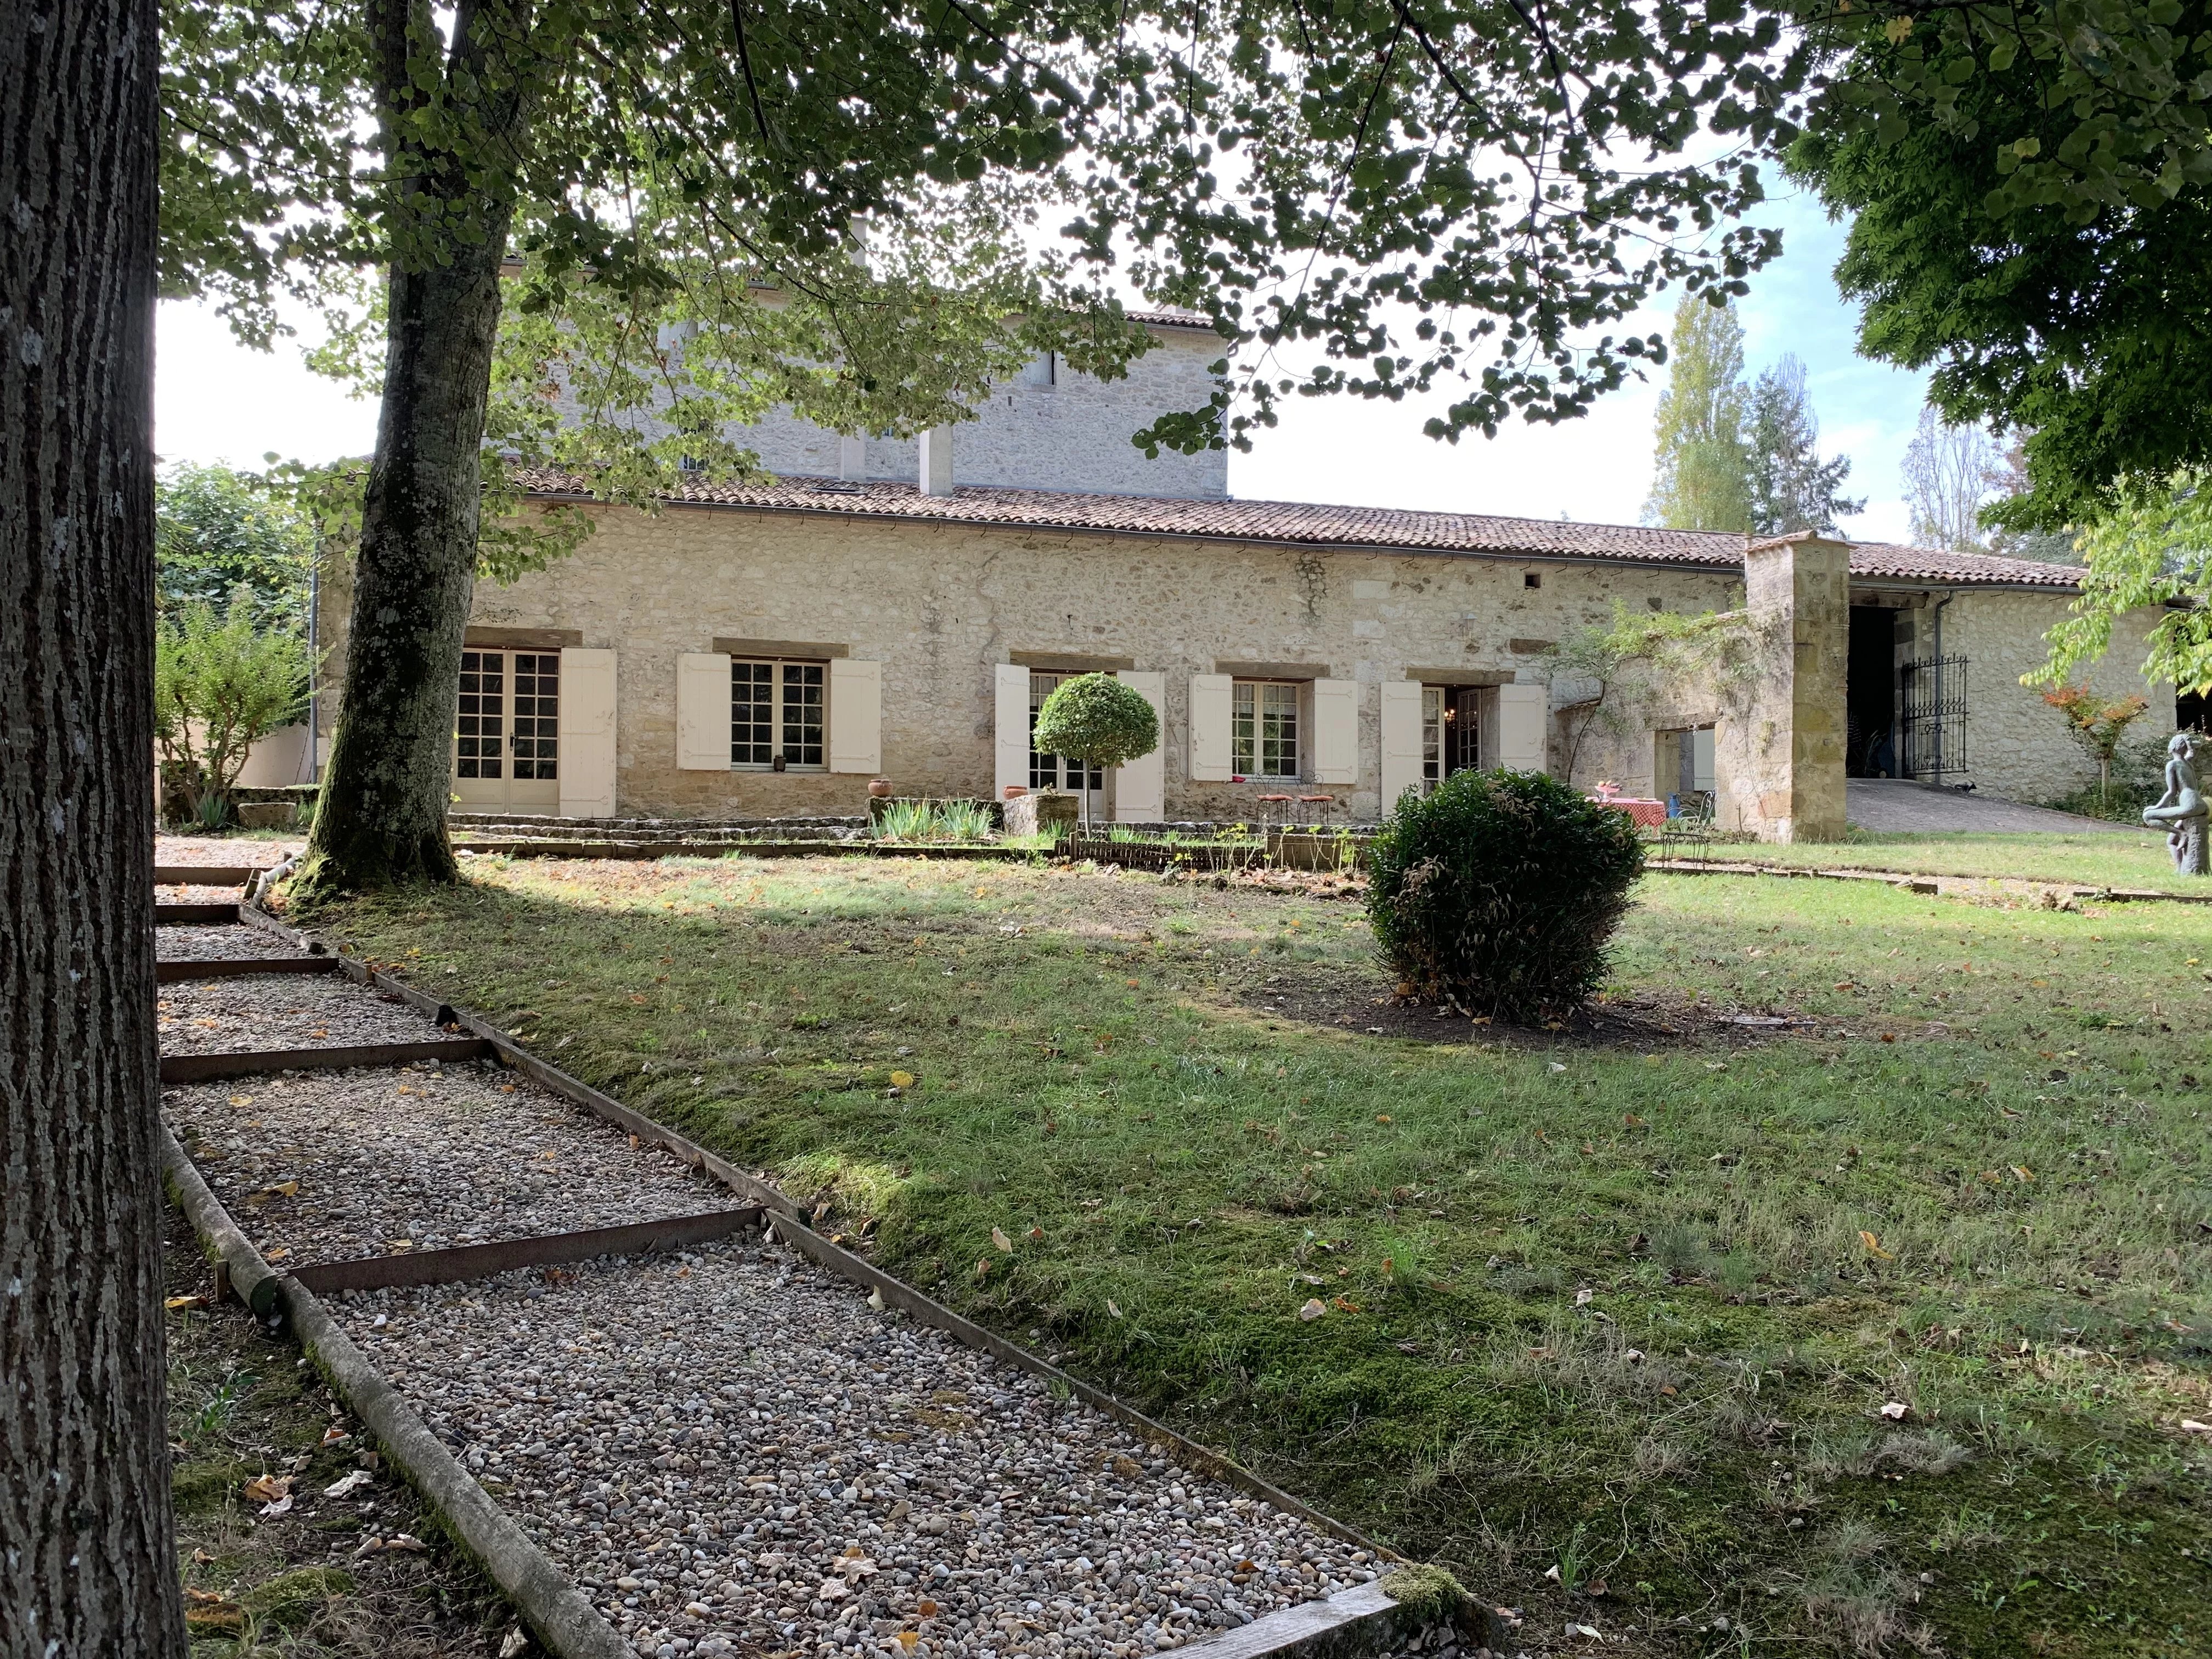 A Magnificent Maison de Maître with a Beautiful Secluded Garden